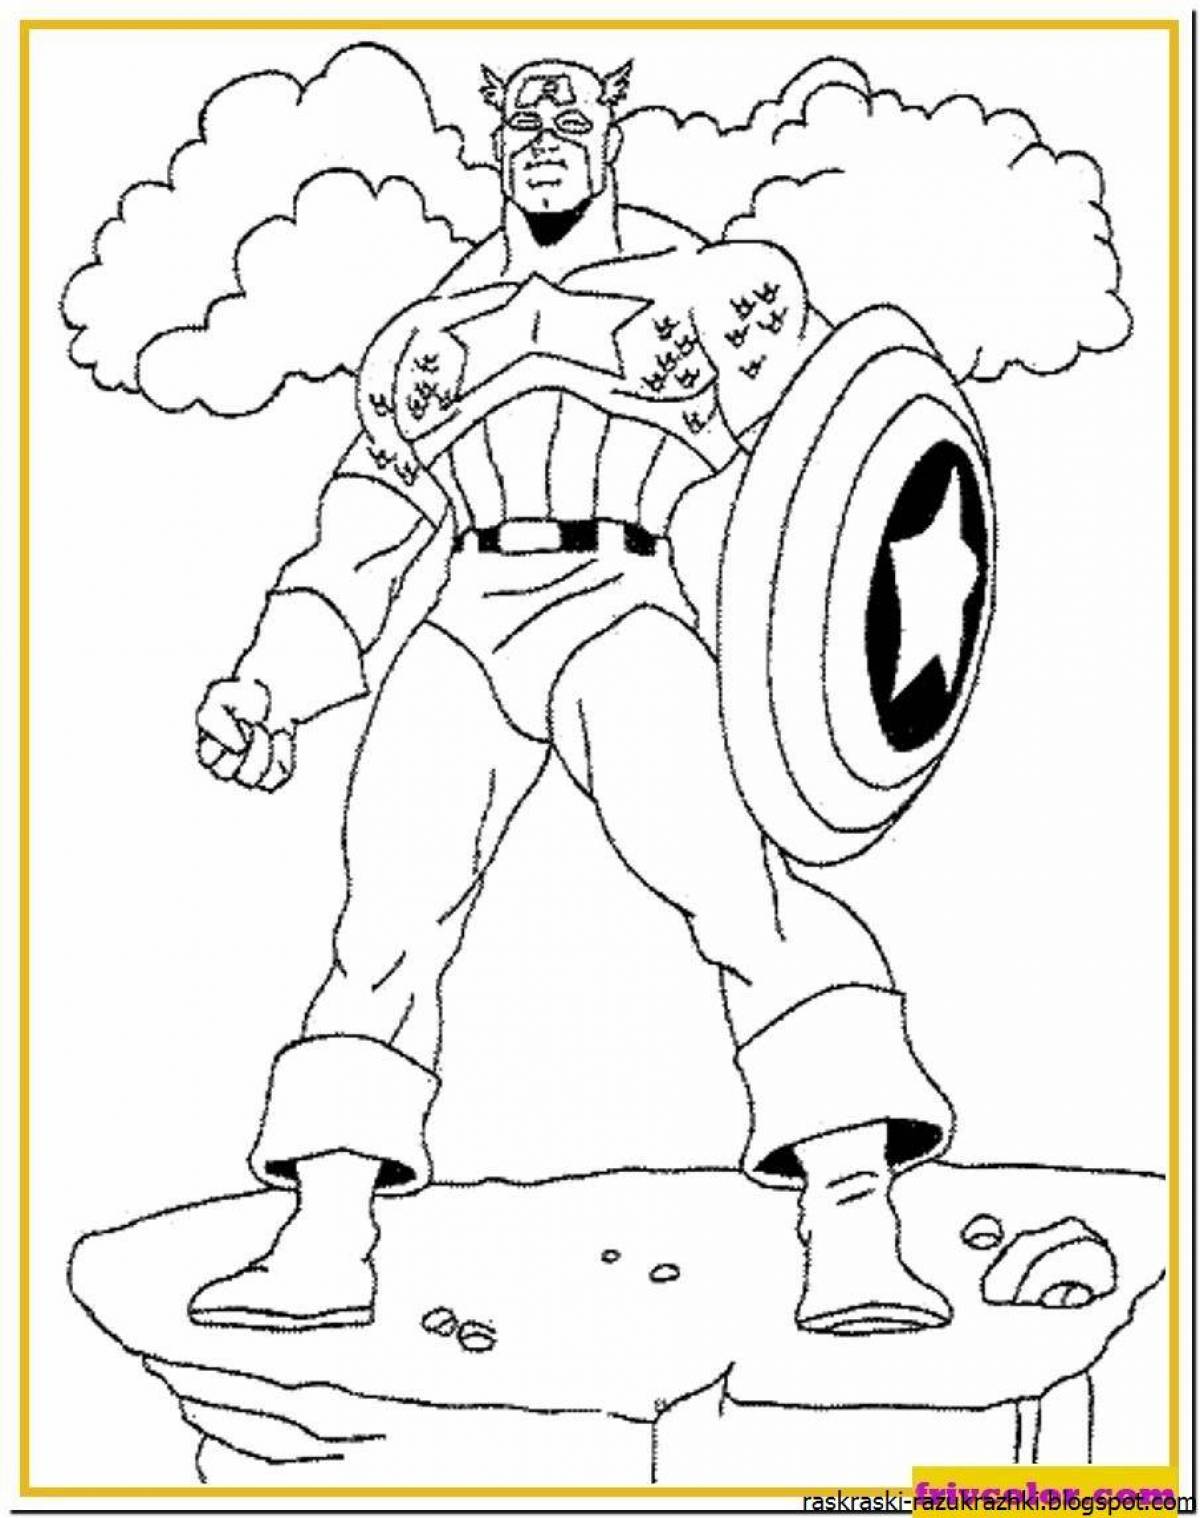 Impressive superhero coloring pages for boys